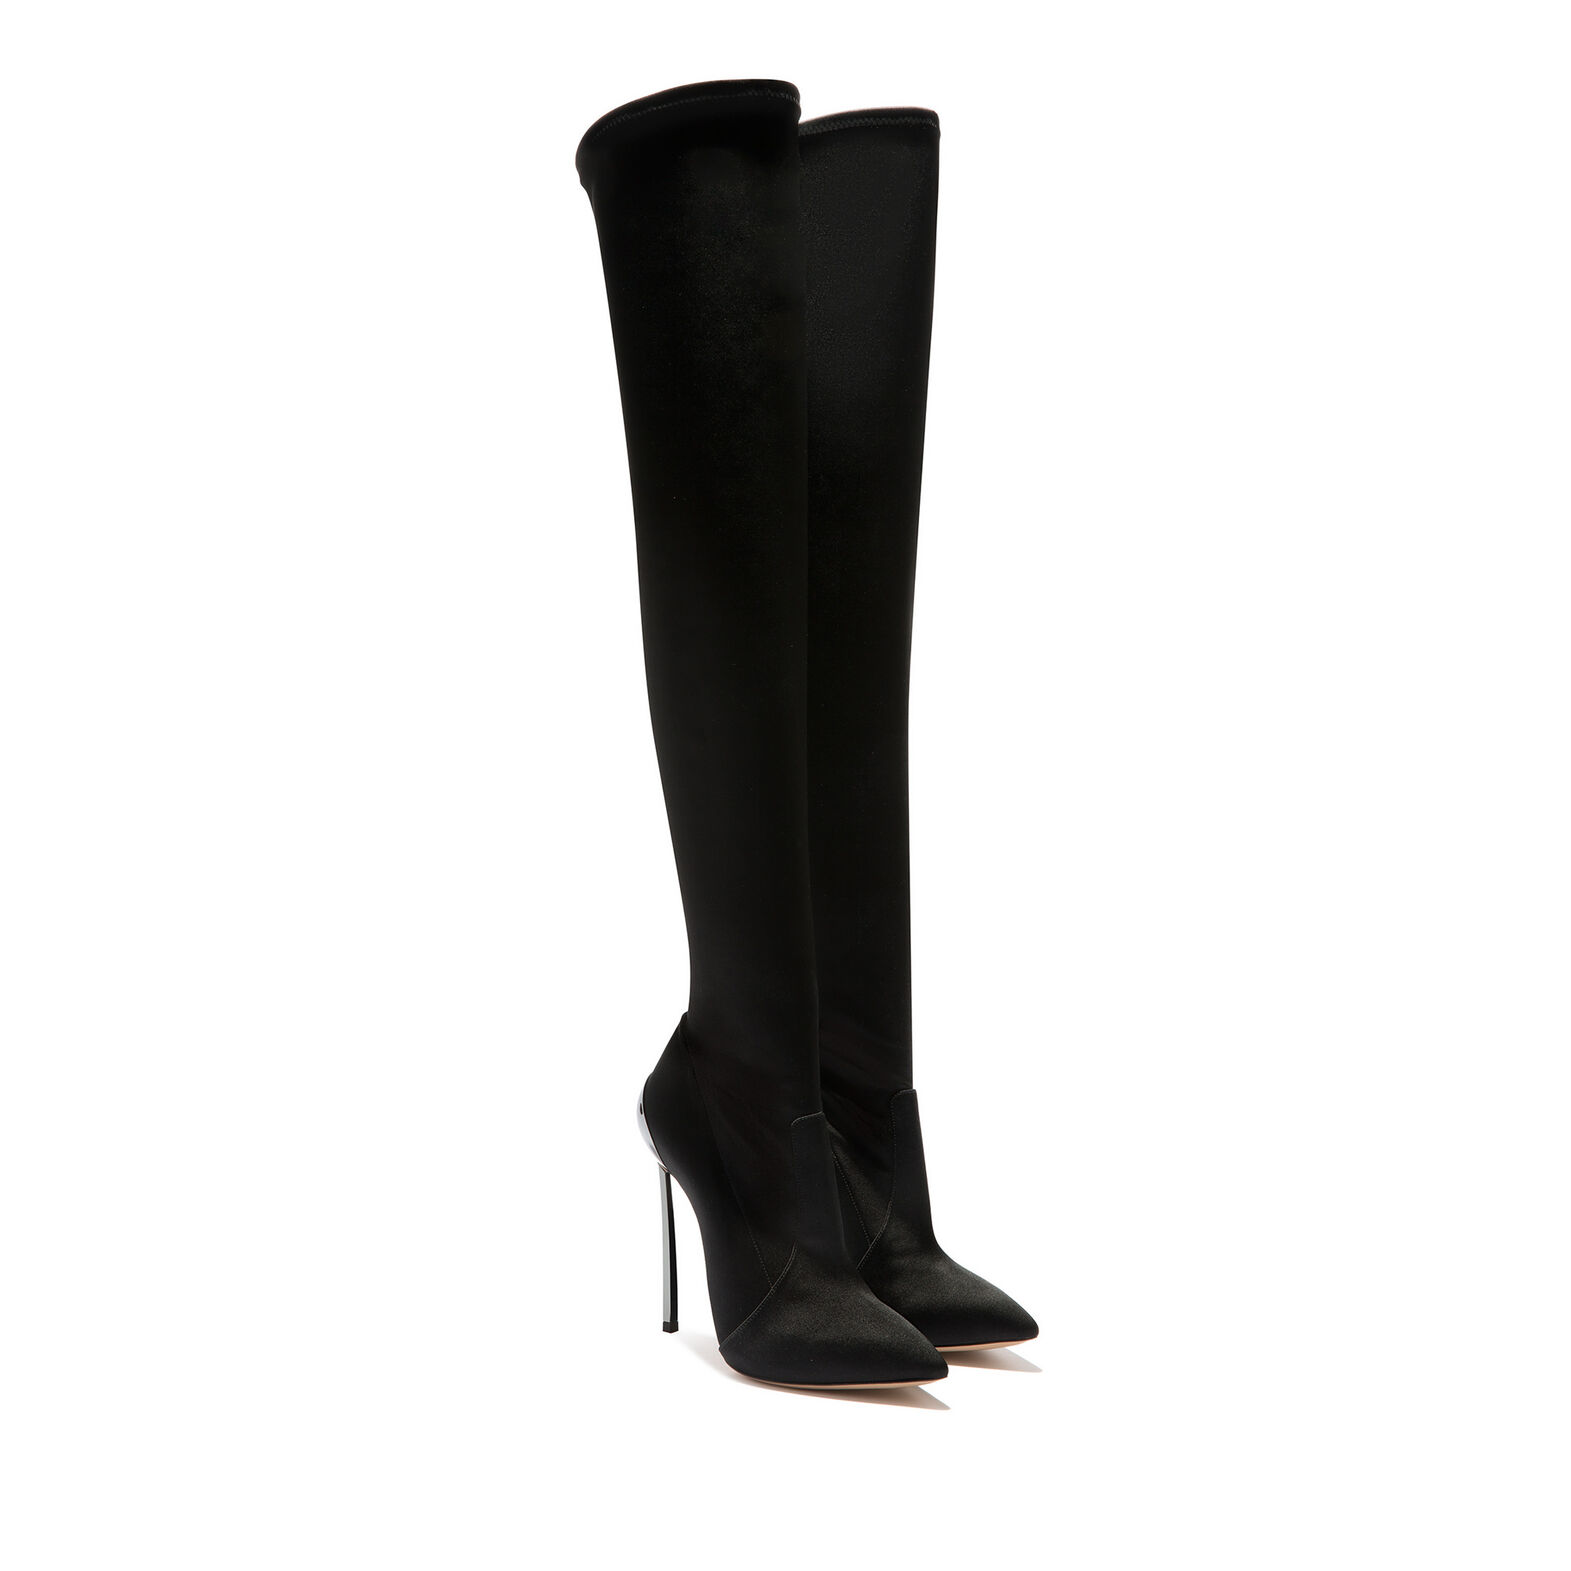 CASADEI Techno Blade Over Knee Stretch Boots in Black | ModeSens